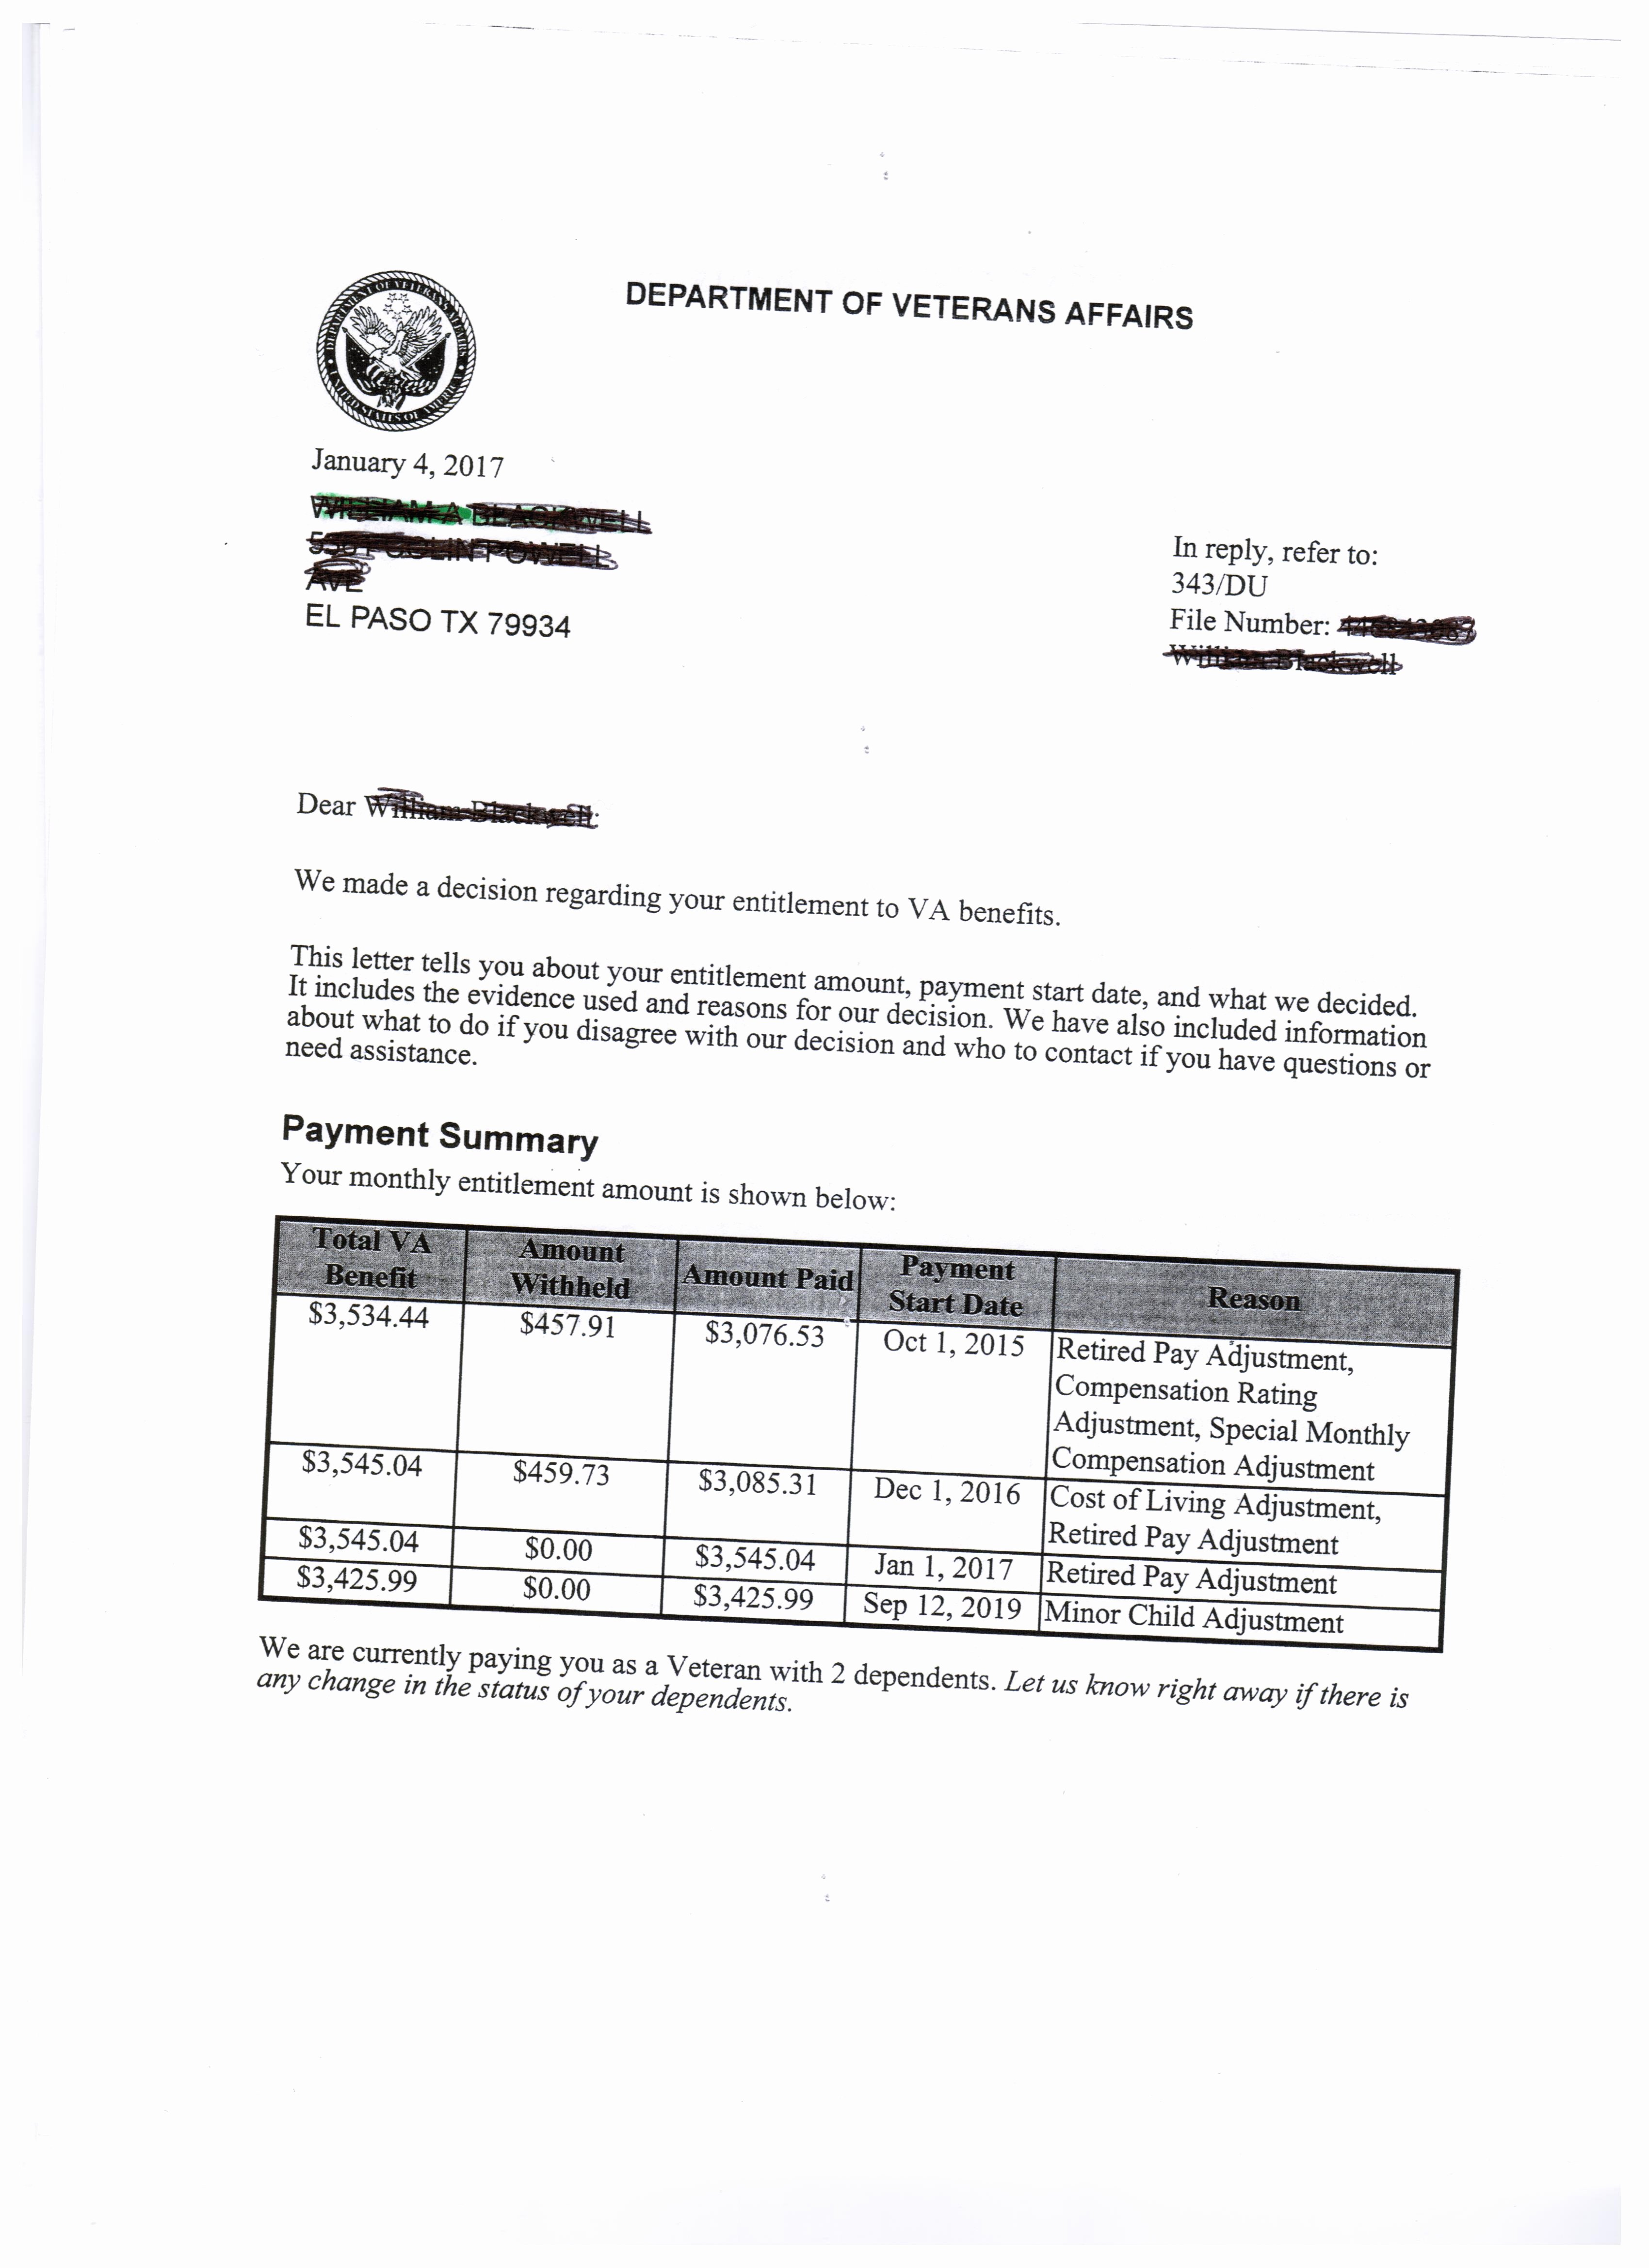 Social Security Awards Letter 2015 Best Of Won Claim but withheld Back Pay Va Disability